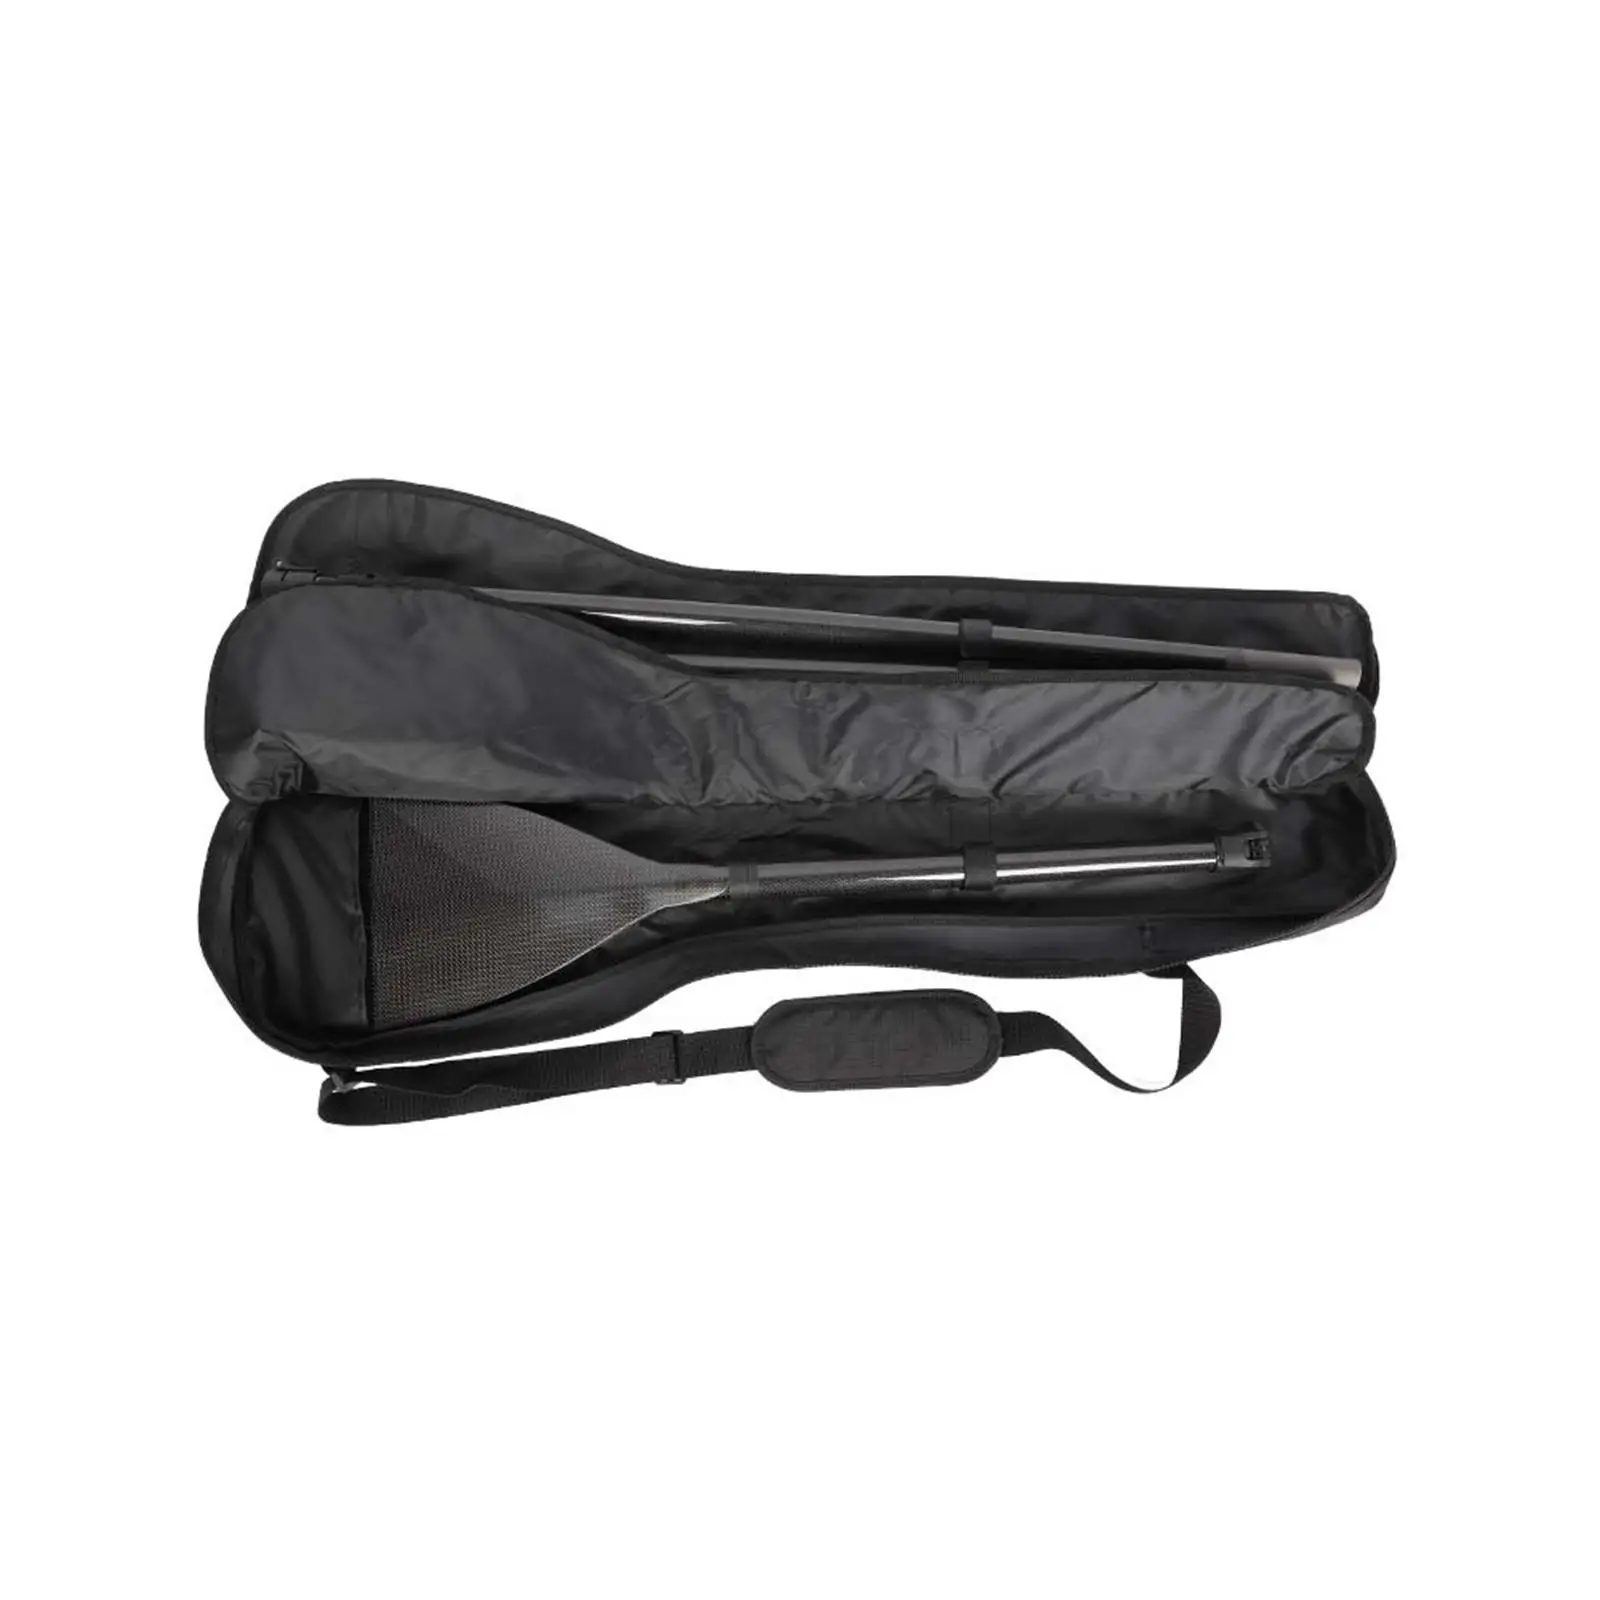 Kayak Paddle Carrying Bag for 3 Piece Split Paddle Length 96cm with Carry Handle, Removable Shoulder Strap Thick Durable Stylish